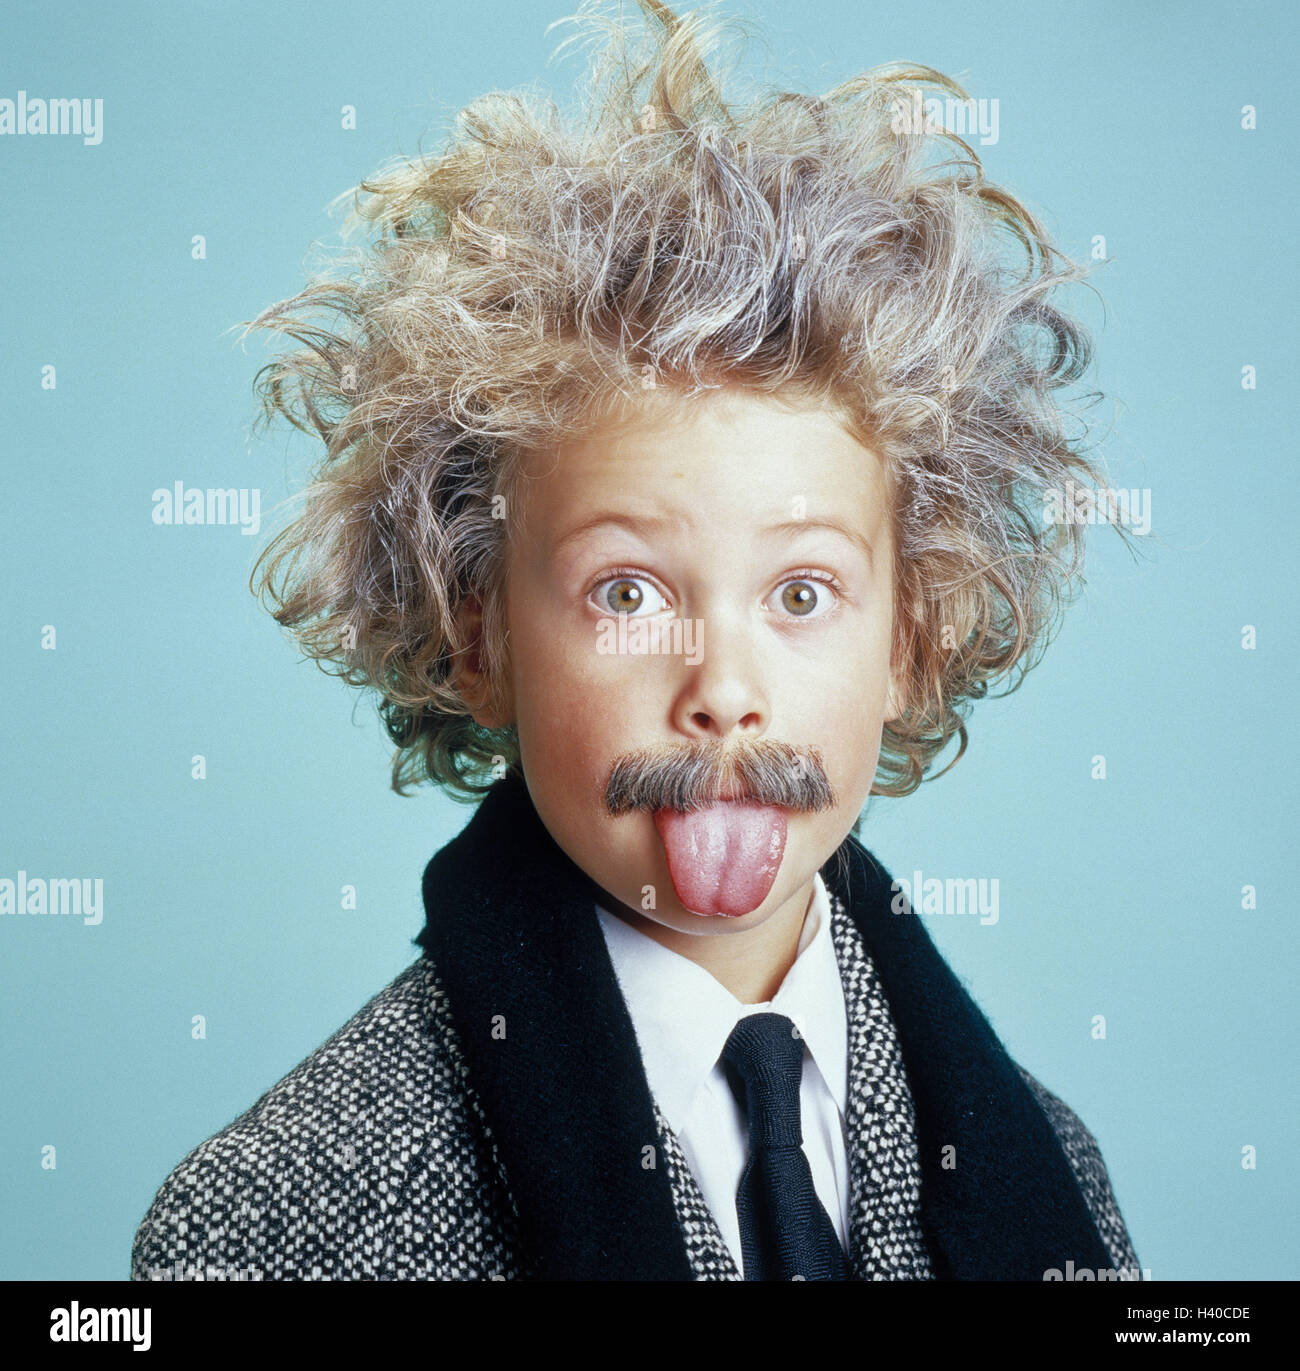 Icon, intelligence, knowledge, child, "Albert Einstein", child portrait, success, mind, talent, know-how, wisely, genius, learn, IQ, boy, lining, Einstein, tongue, stick out, cheeky, smartly, model Stock Photo